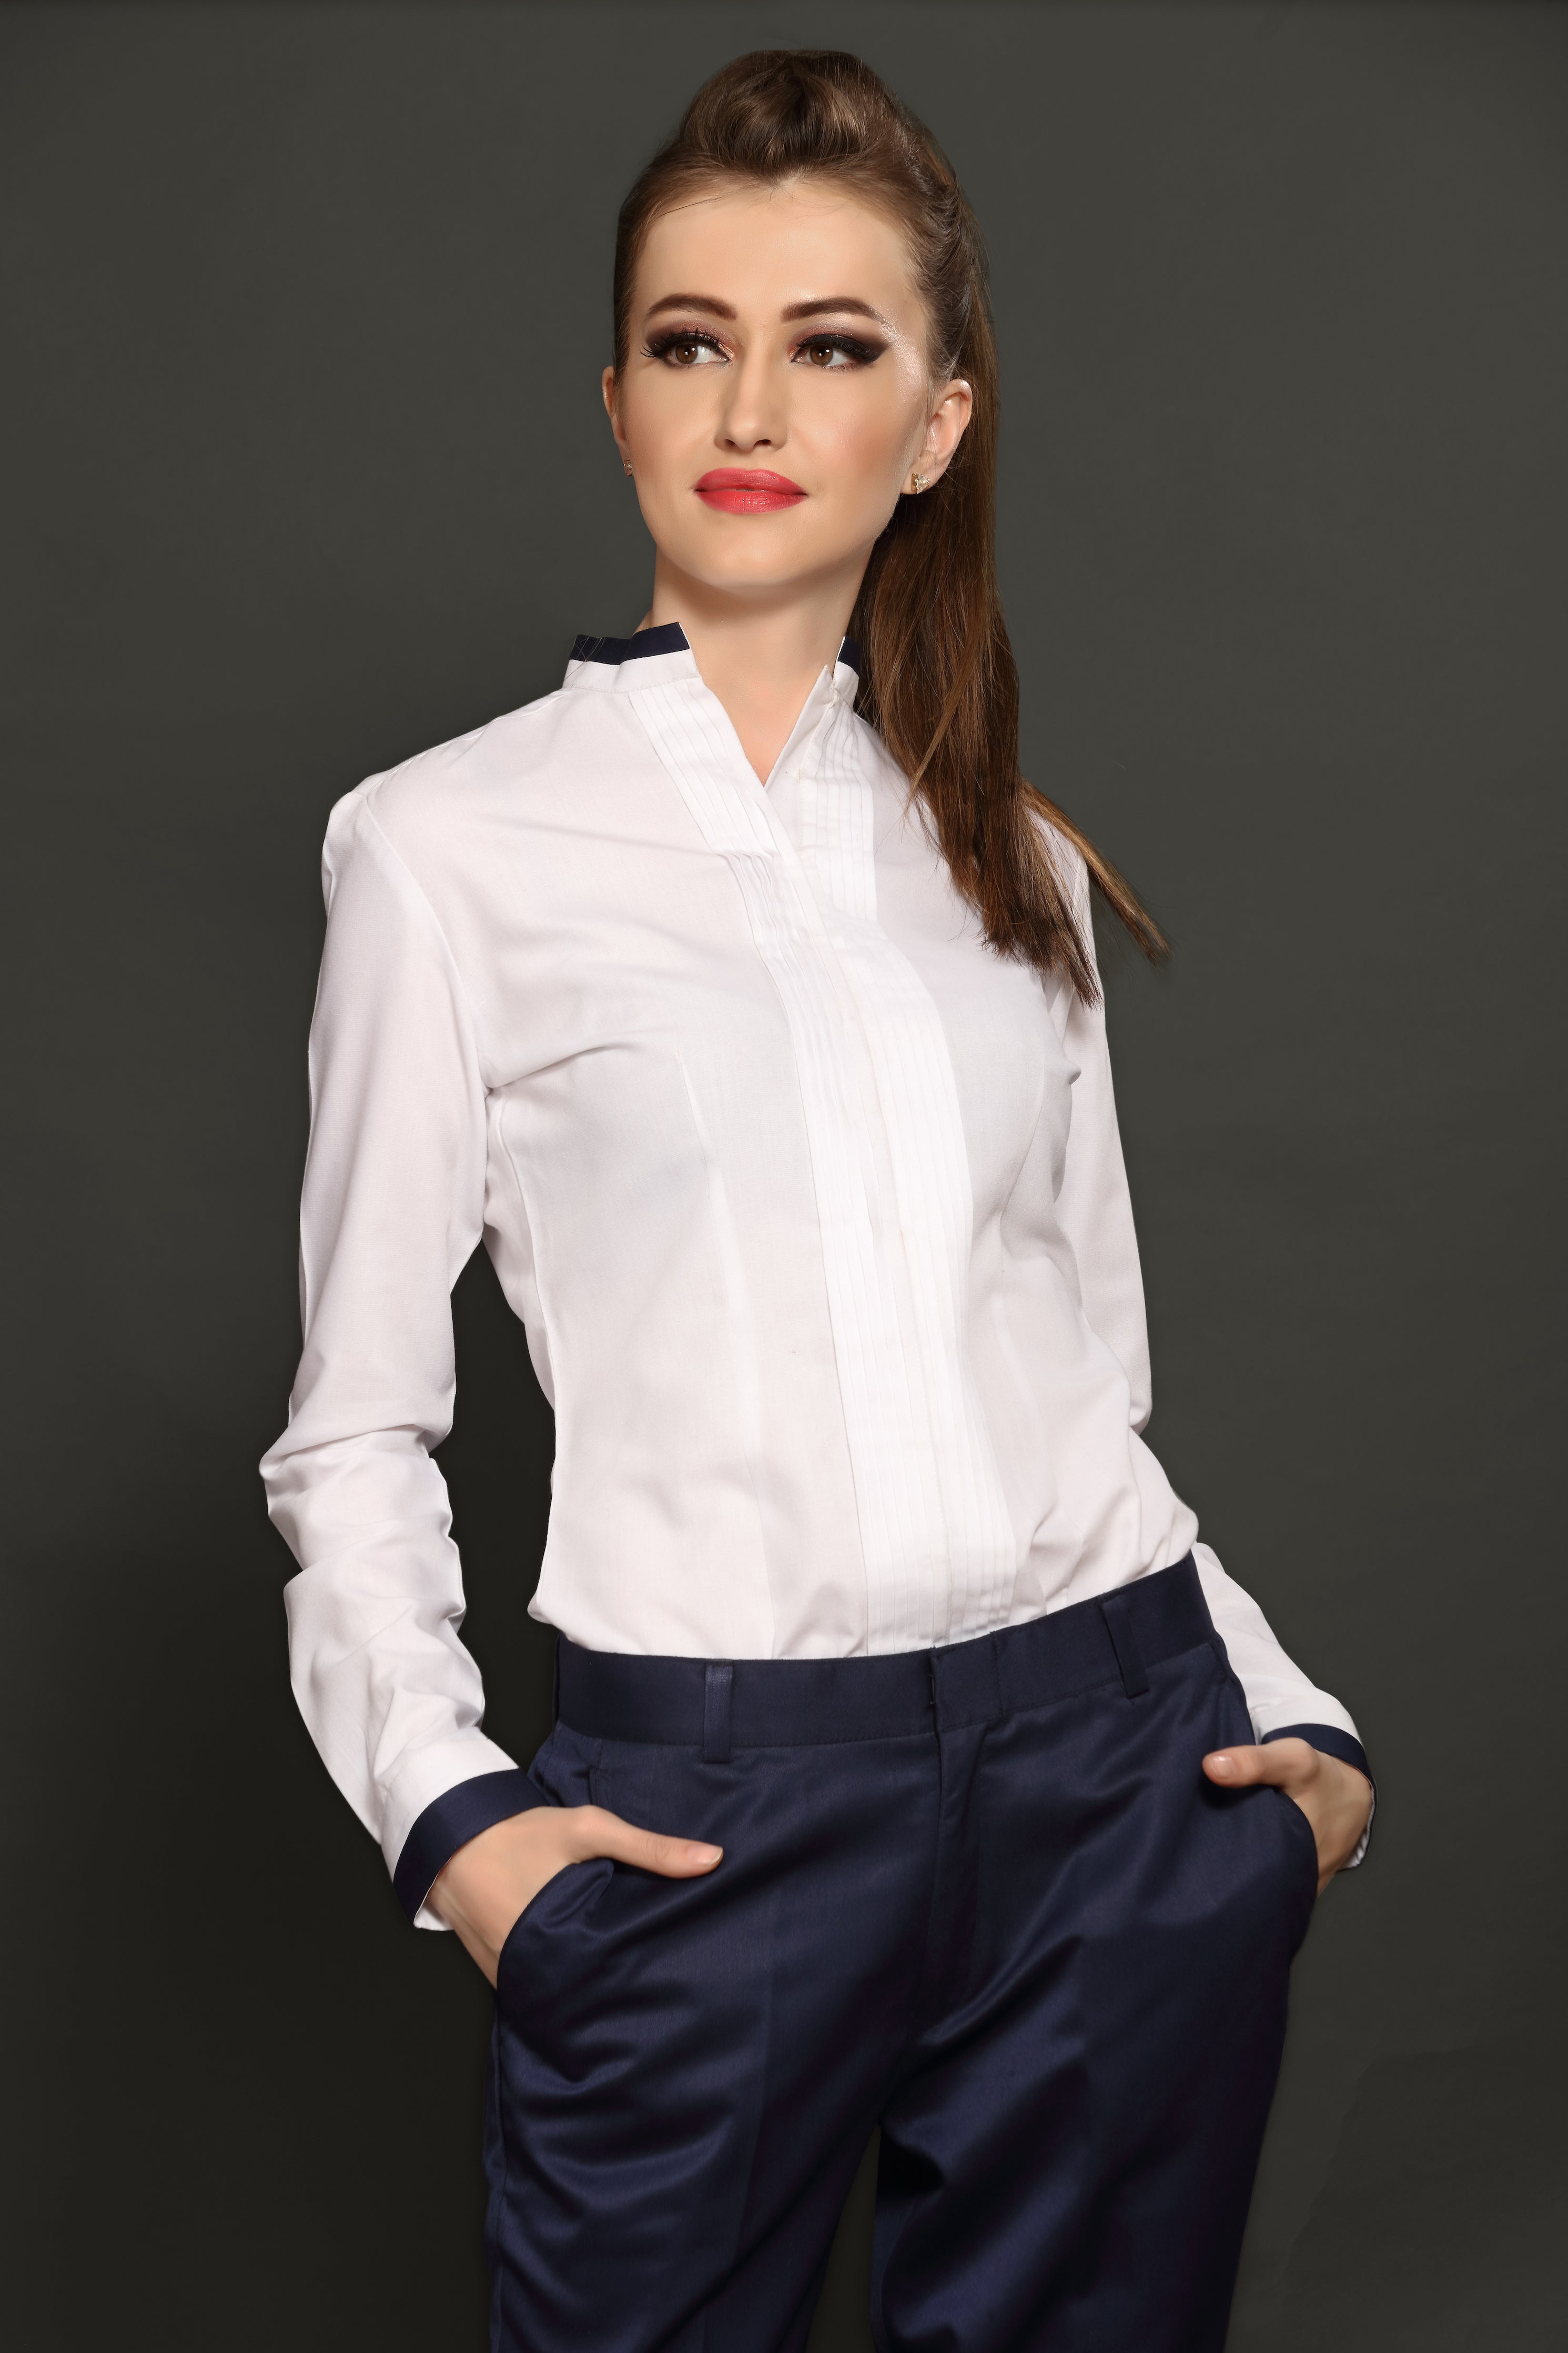 Attractive Woman Wear Business Look. Women Look and Sensual. Model Wear White  Shirt and Black Pants. Stock Image - Image of jeans, clothes: 223181869